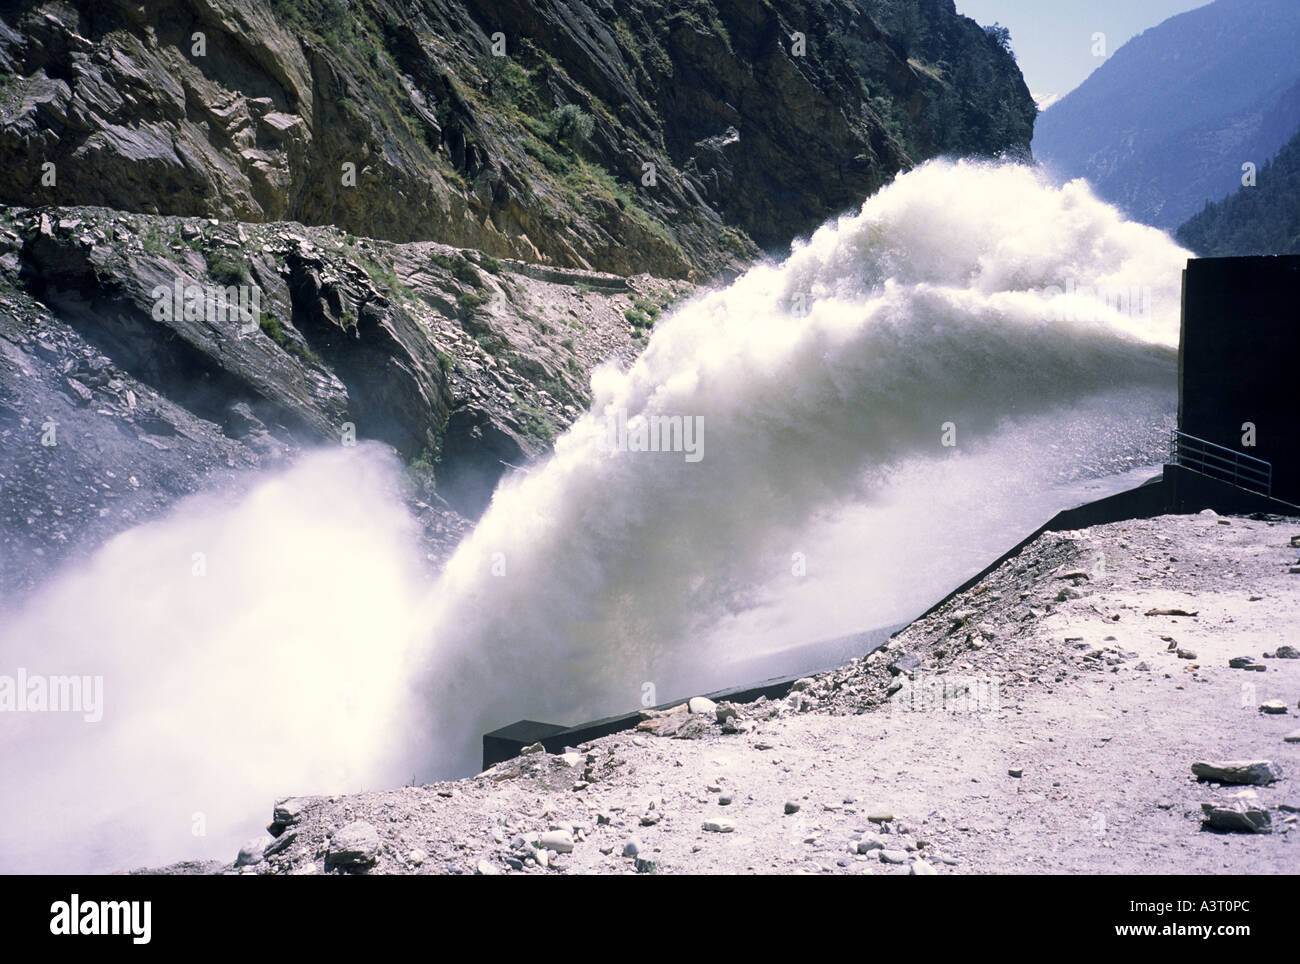 Water spouts from outlet pipe from a new hydro-electric generating station in Sangla Valley, HP India Stock Photo